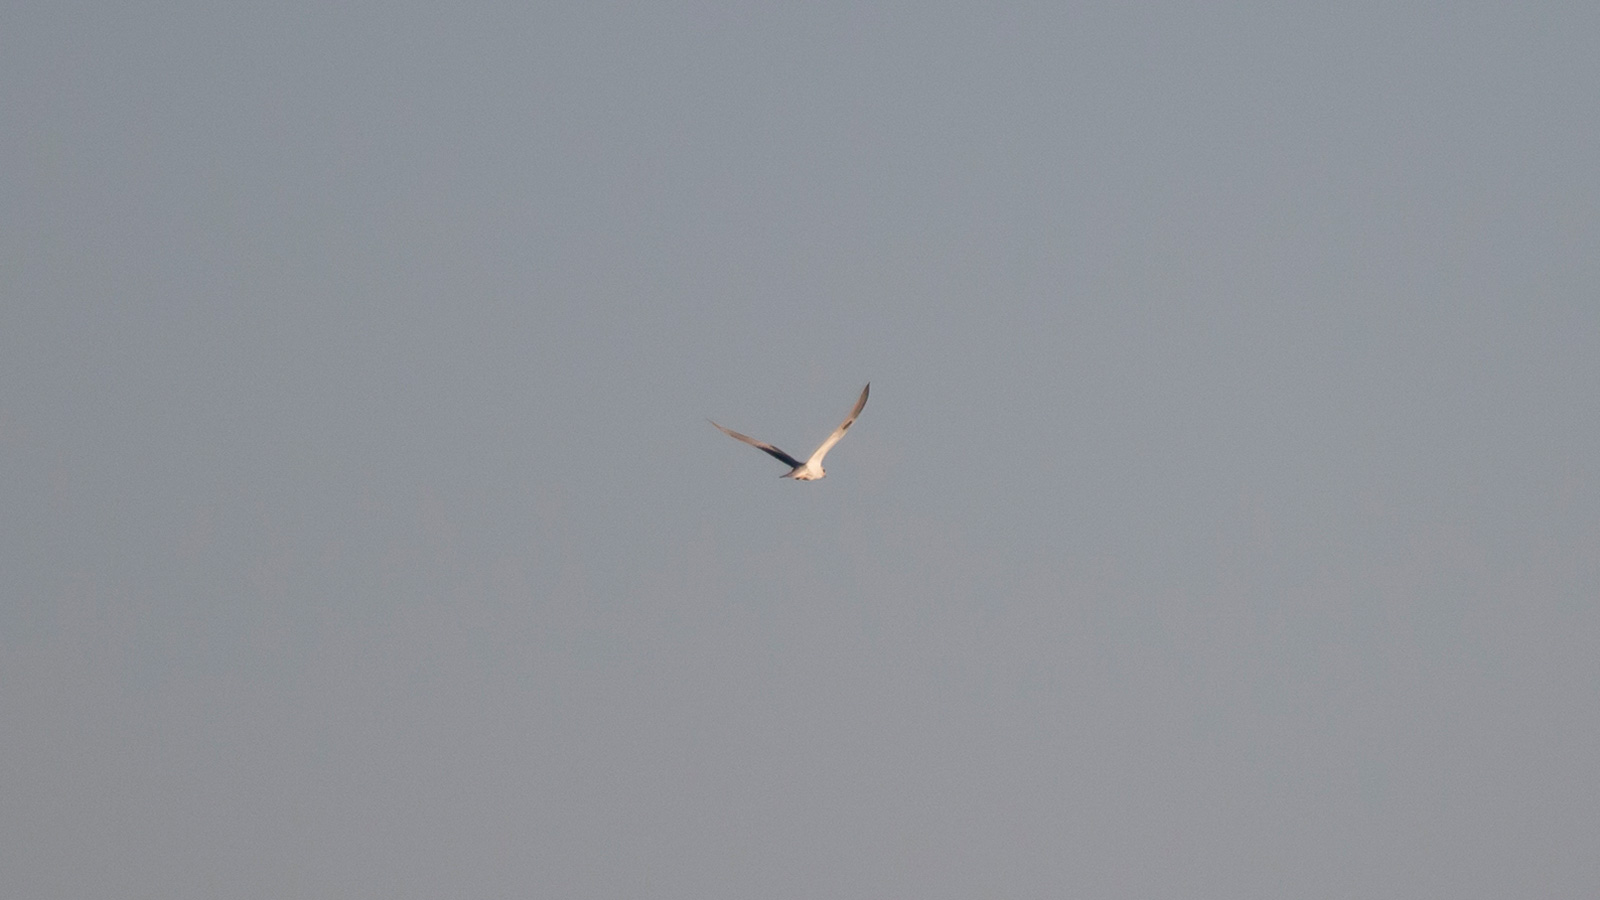 White-tailed kite soaring in the sky at dusk